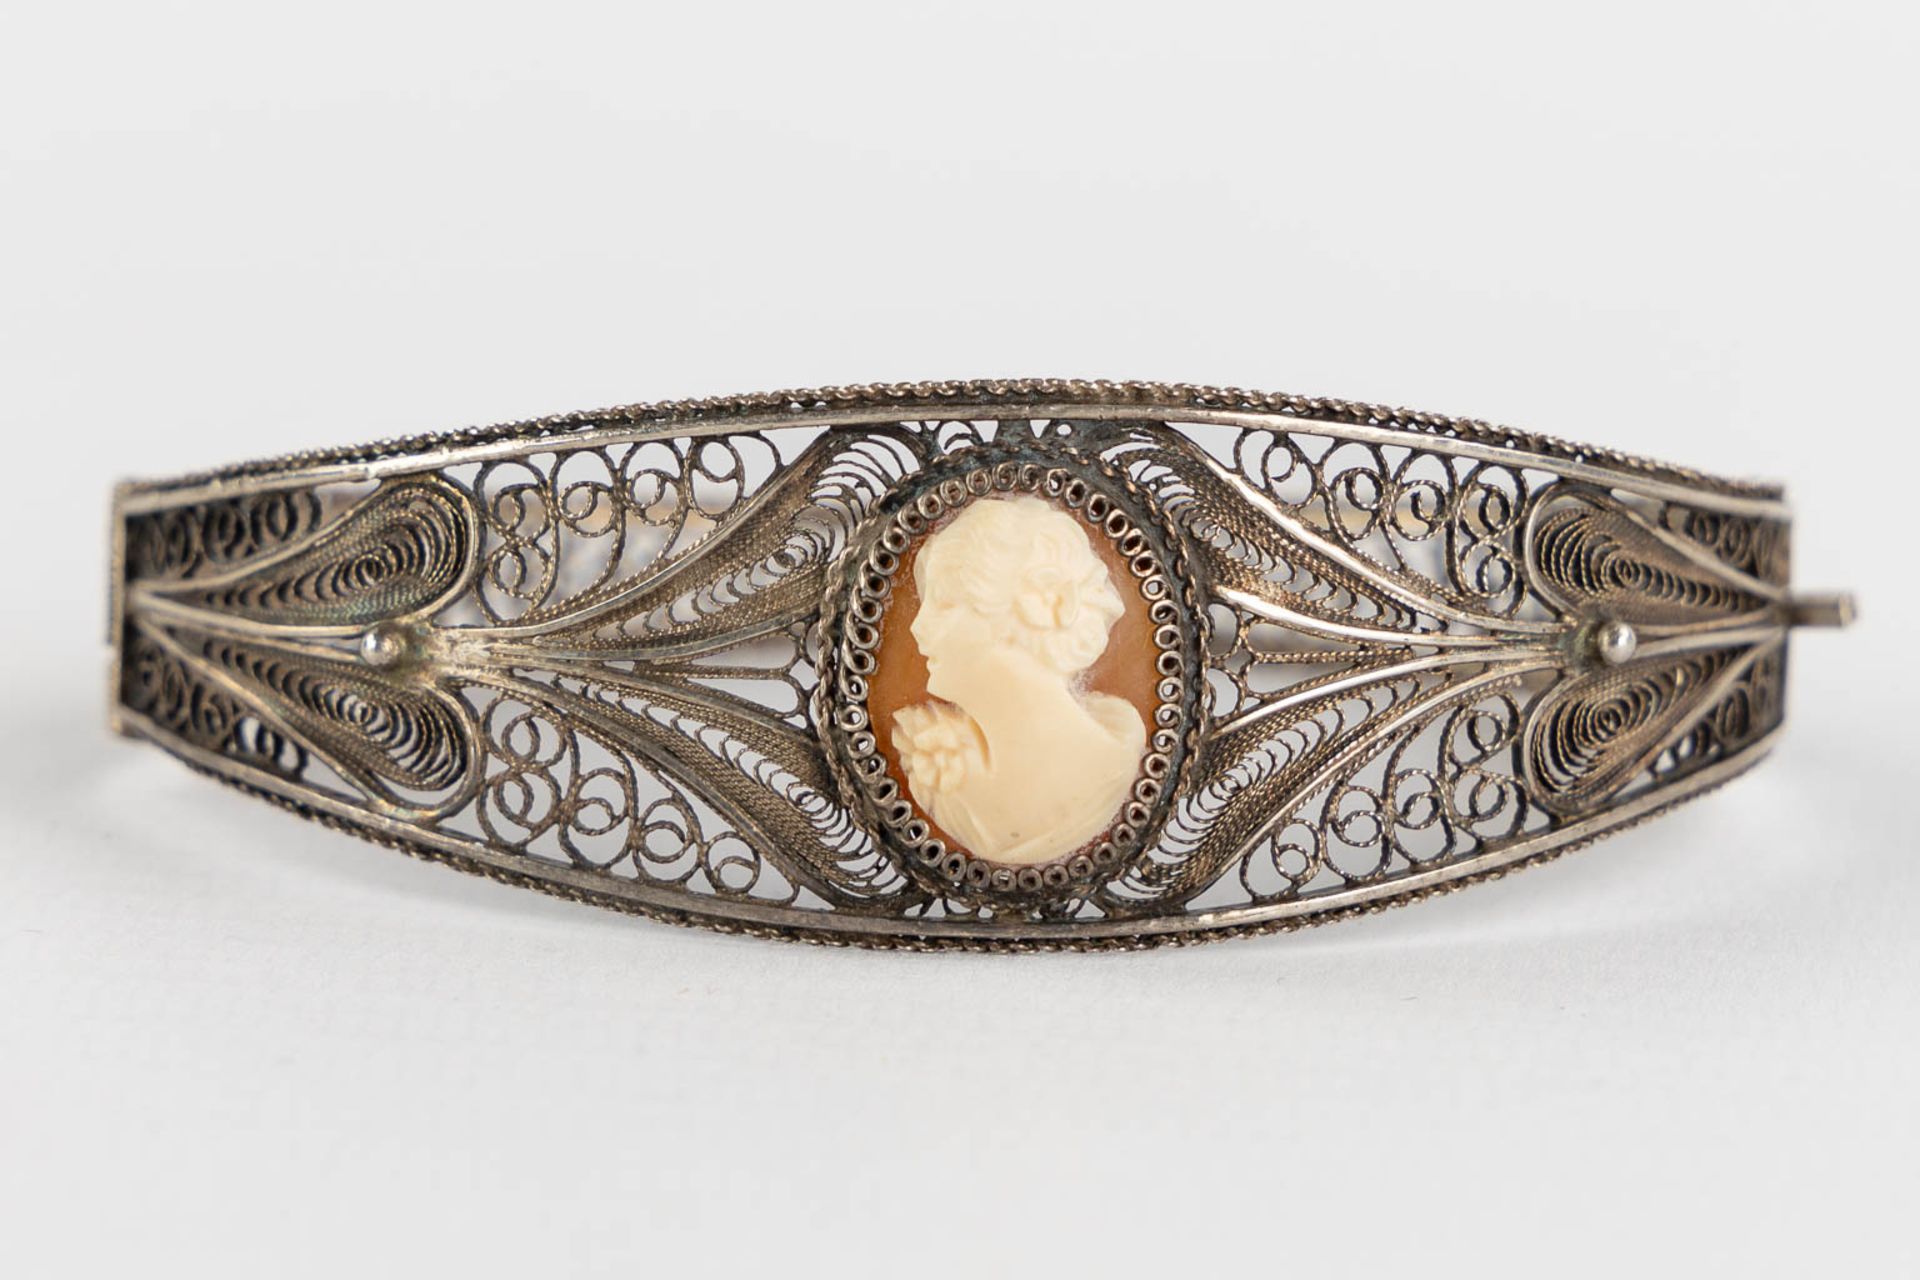 A collection of silver brooches, pendants and bracelets, Filigrane silver. 90g. (H:7 cm) - Image 8 of 8